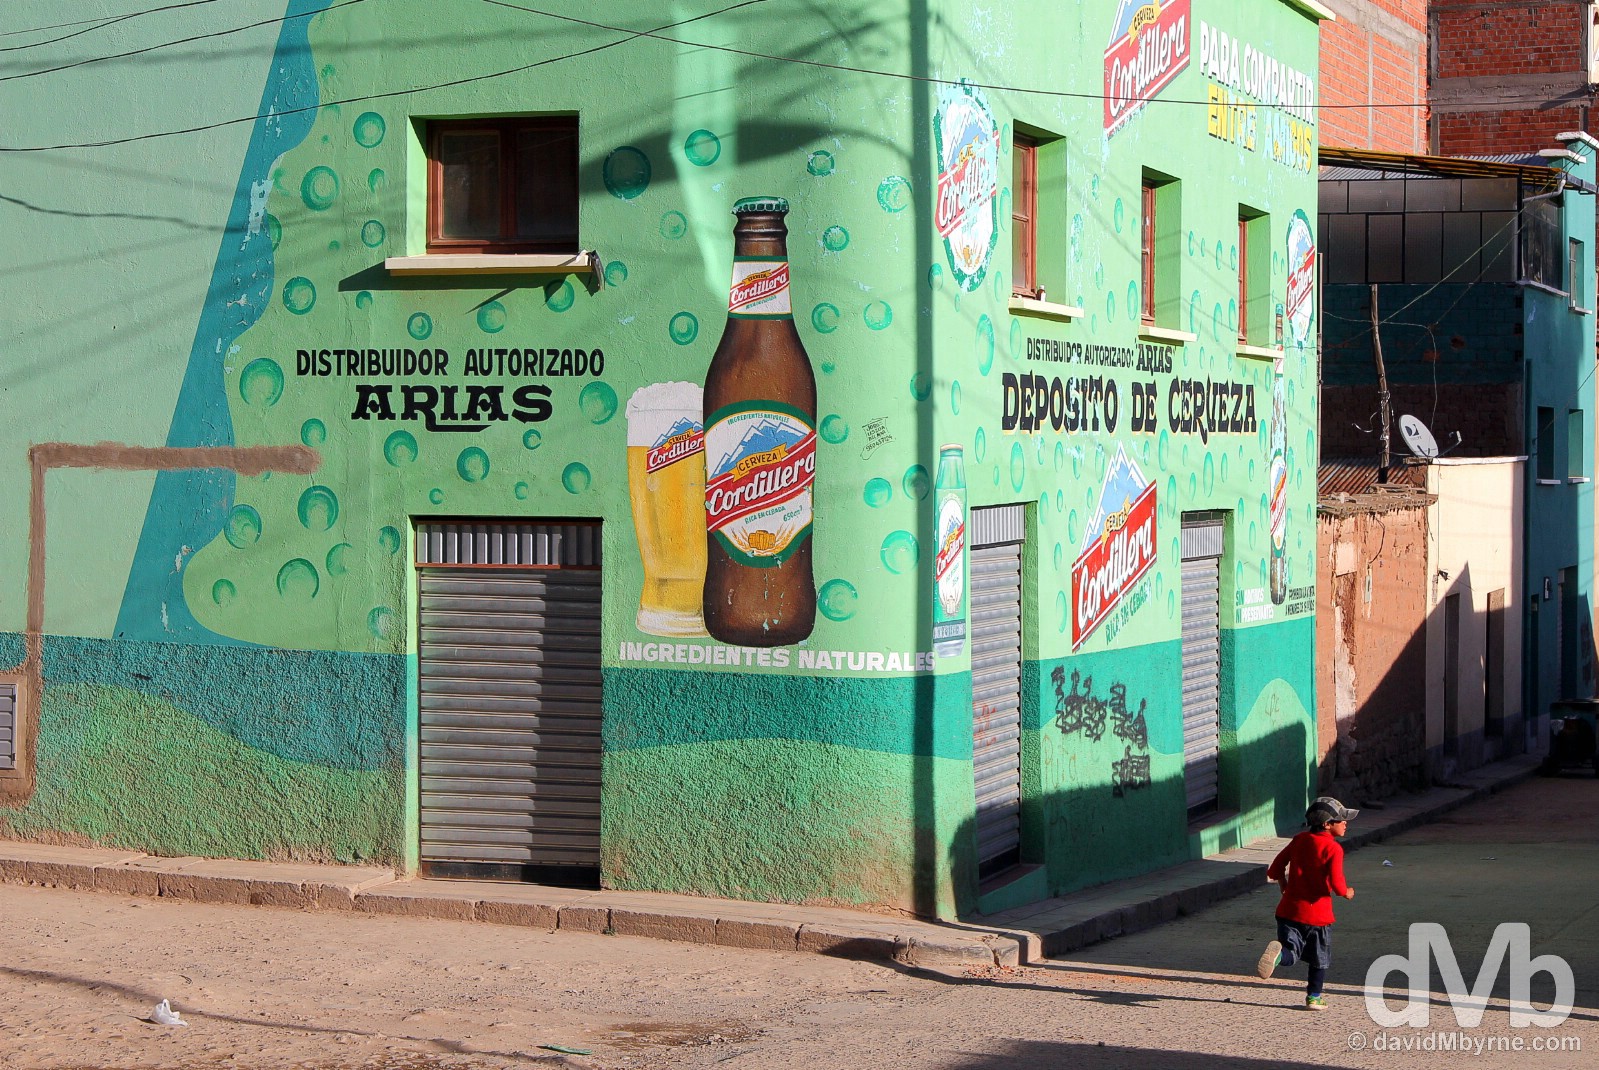 On the streets of Copacabana, Bolivia. August 23, 2015.